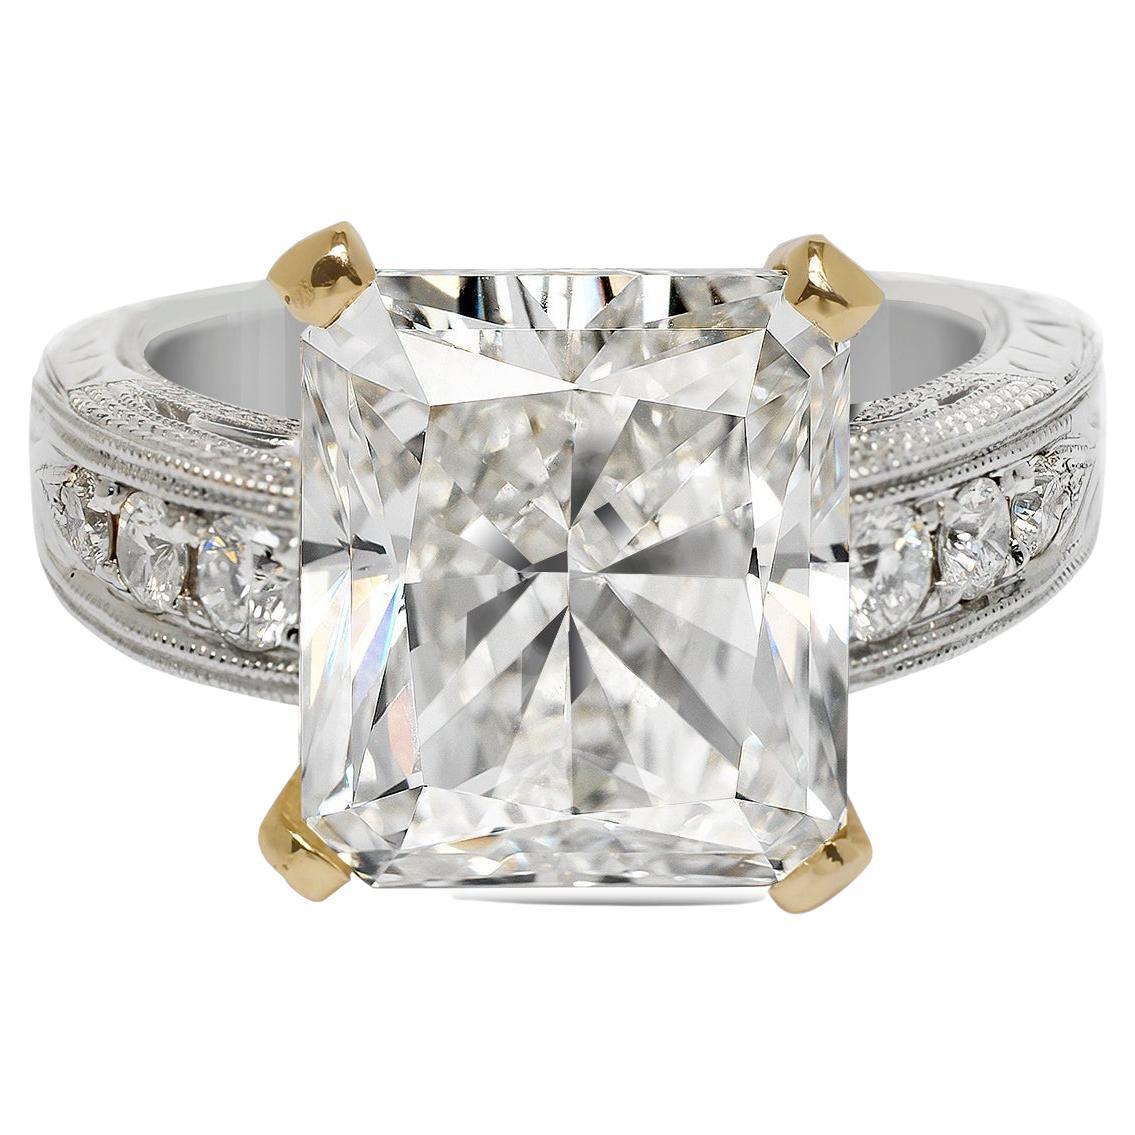 9 Carat Radiant Cut Diamond Engagement Ring Certified F VS For Sale